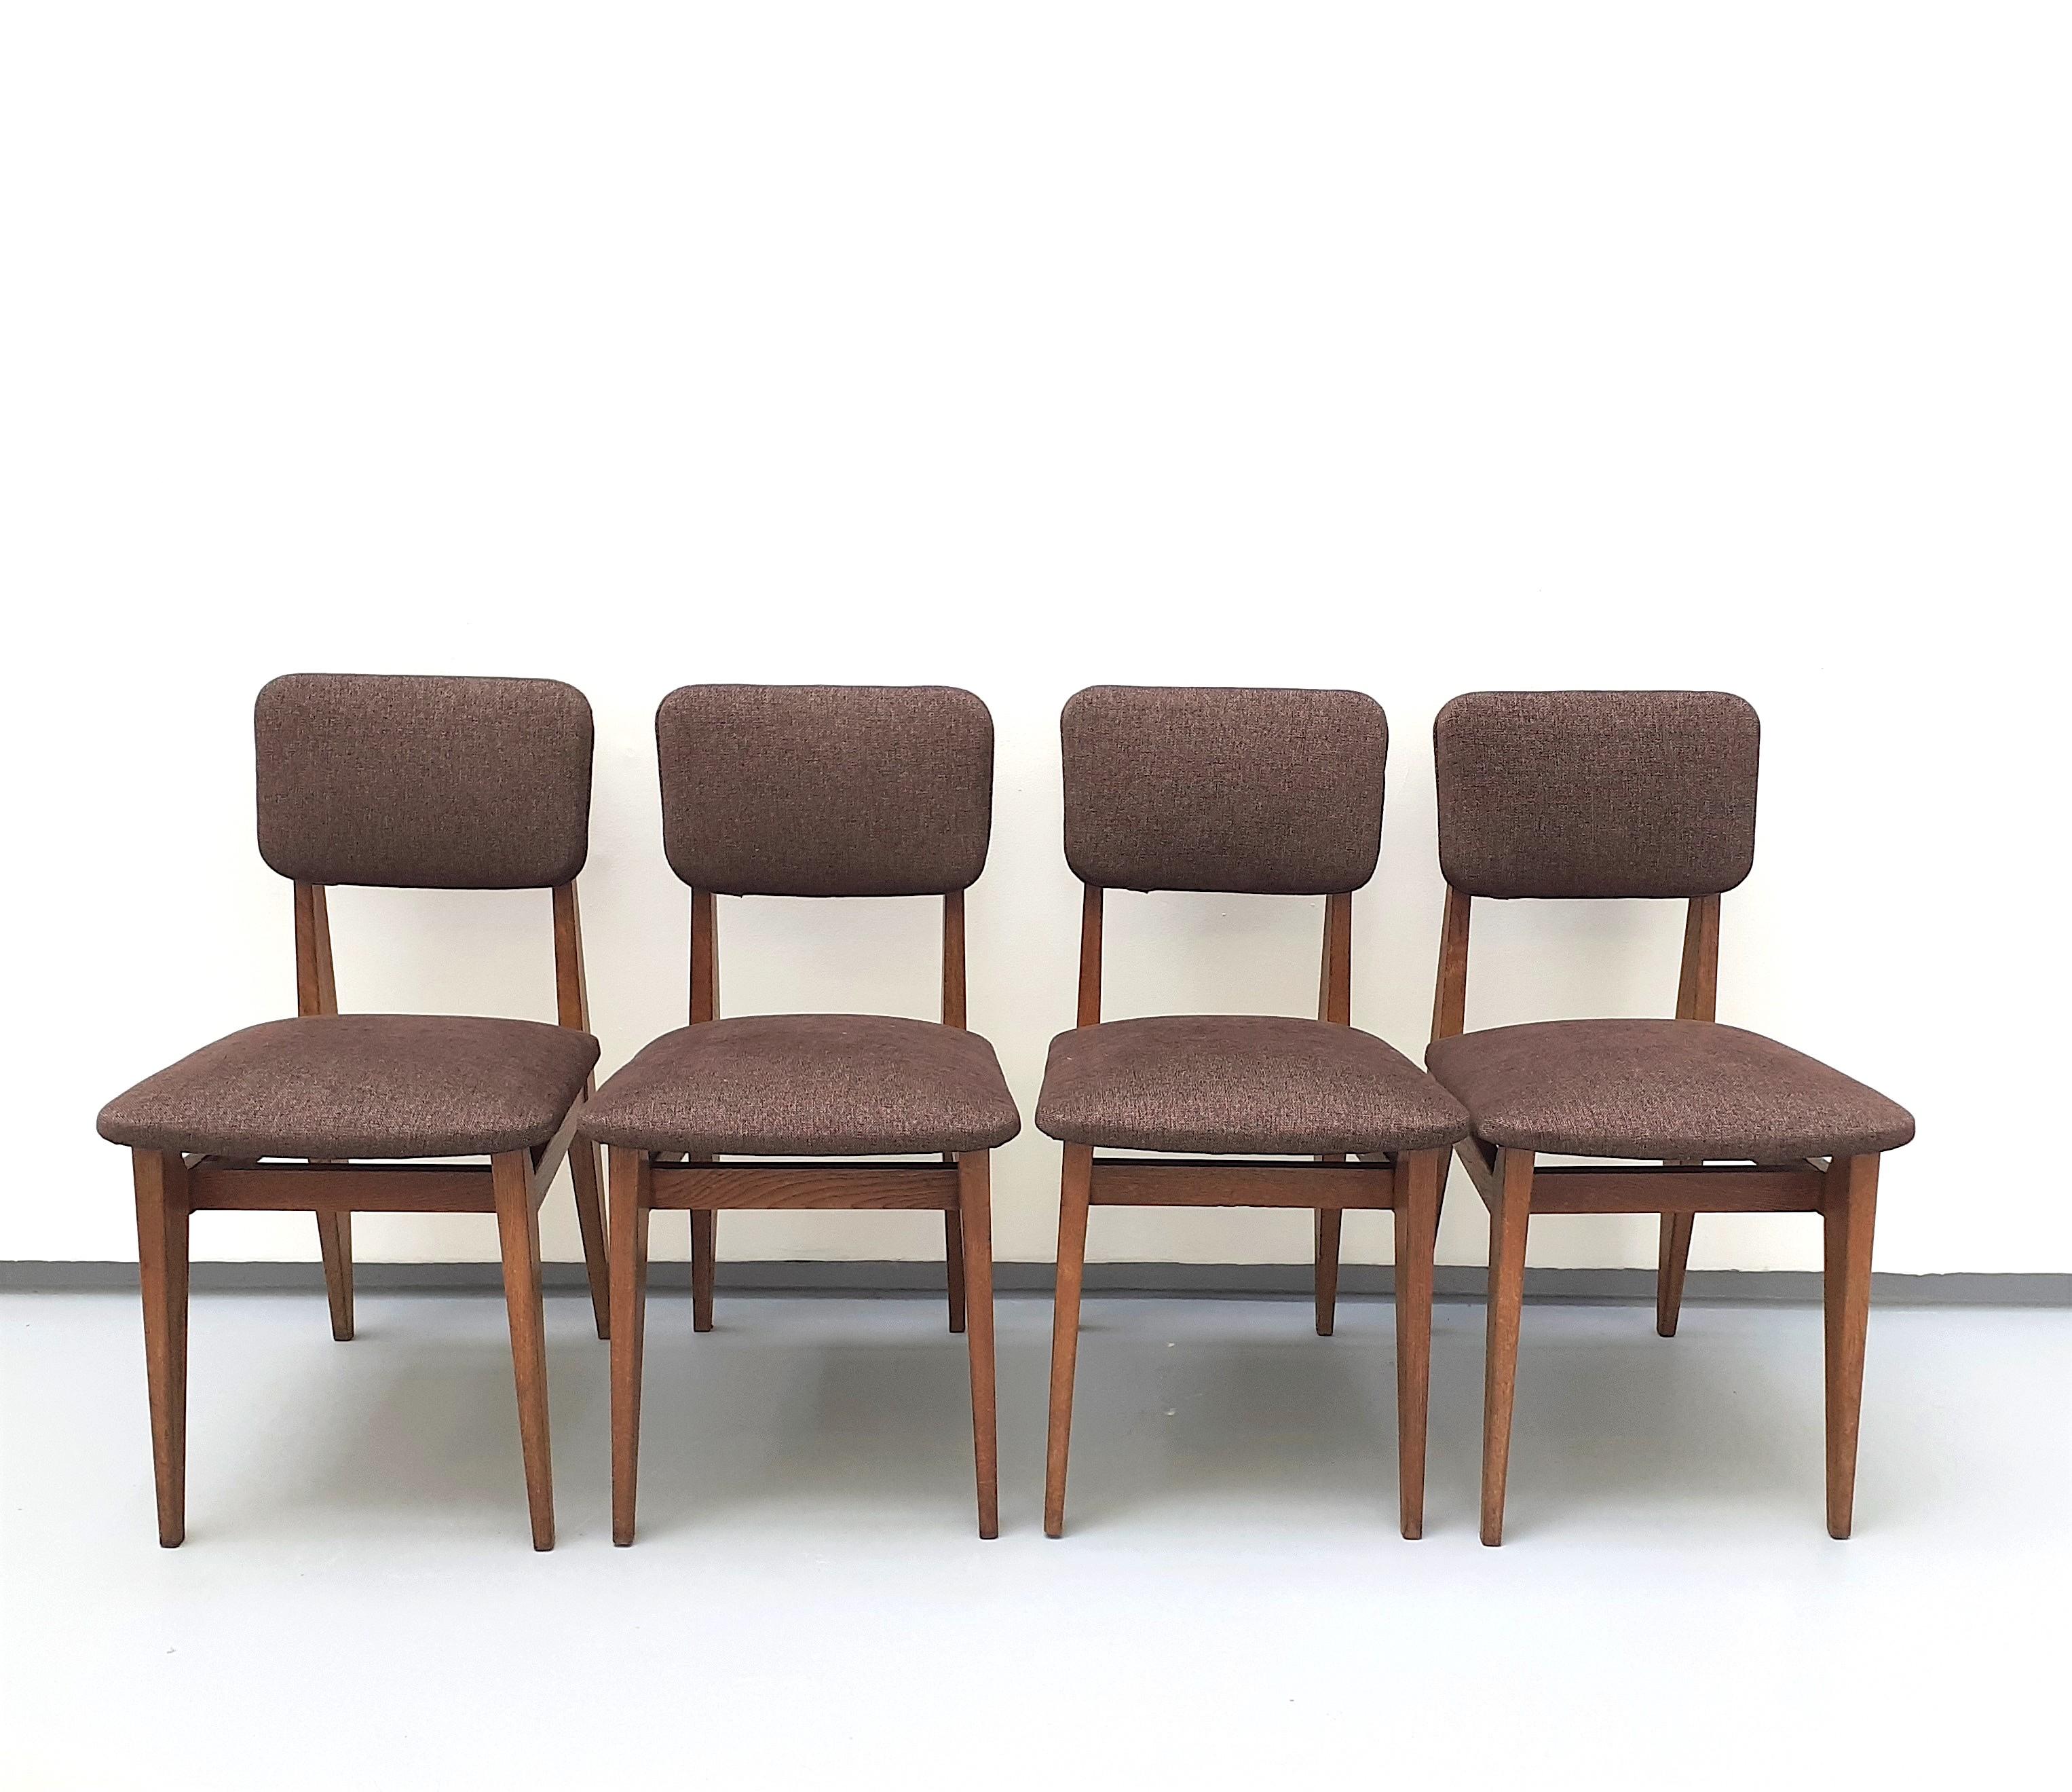 Set of 4 wood and fabric chairs by Marcel Gascoin

This set of chairs has no defects, but it may show slight traces of use. 

Marcel Gascoin is the main representative of a French design born after the Second World War, with the reconstruction